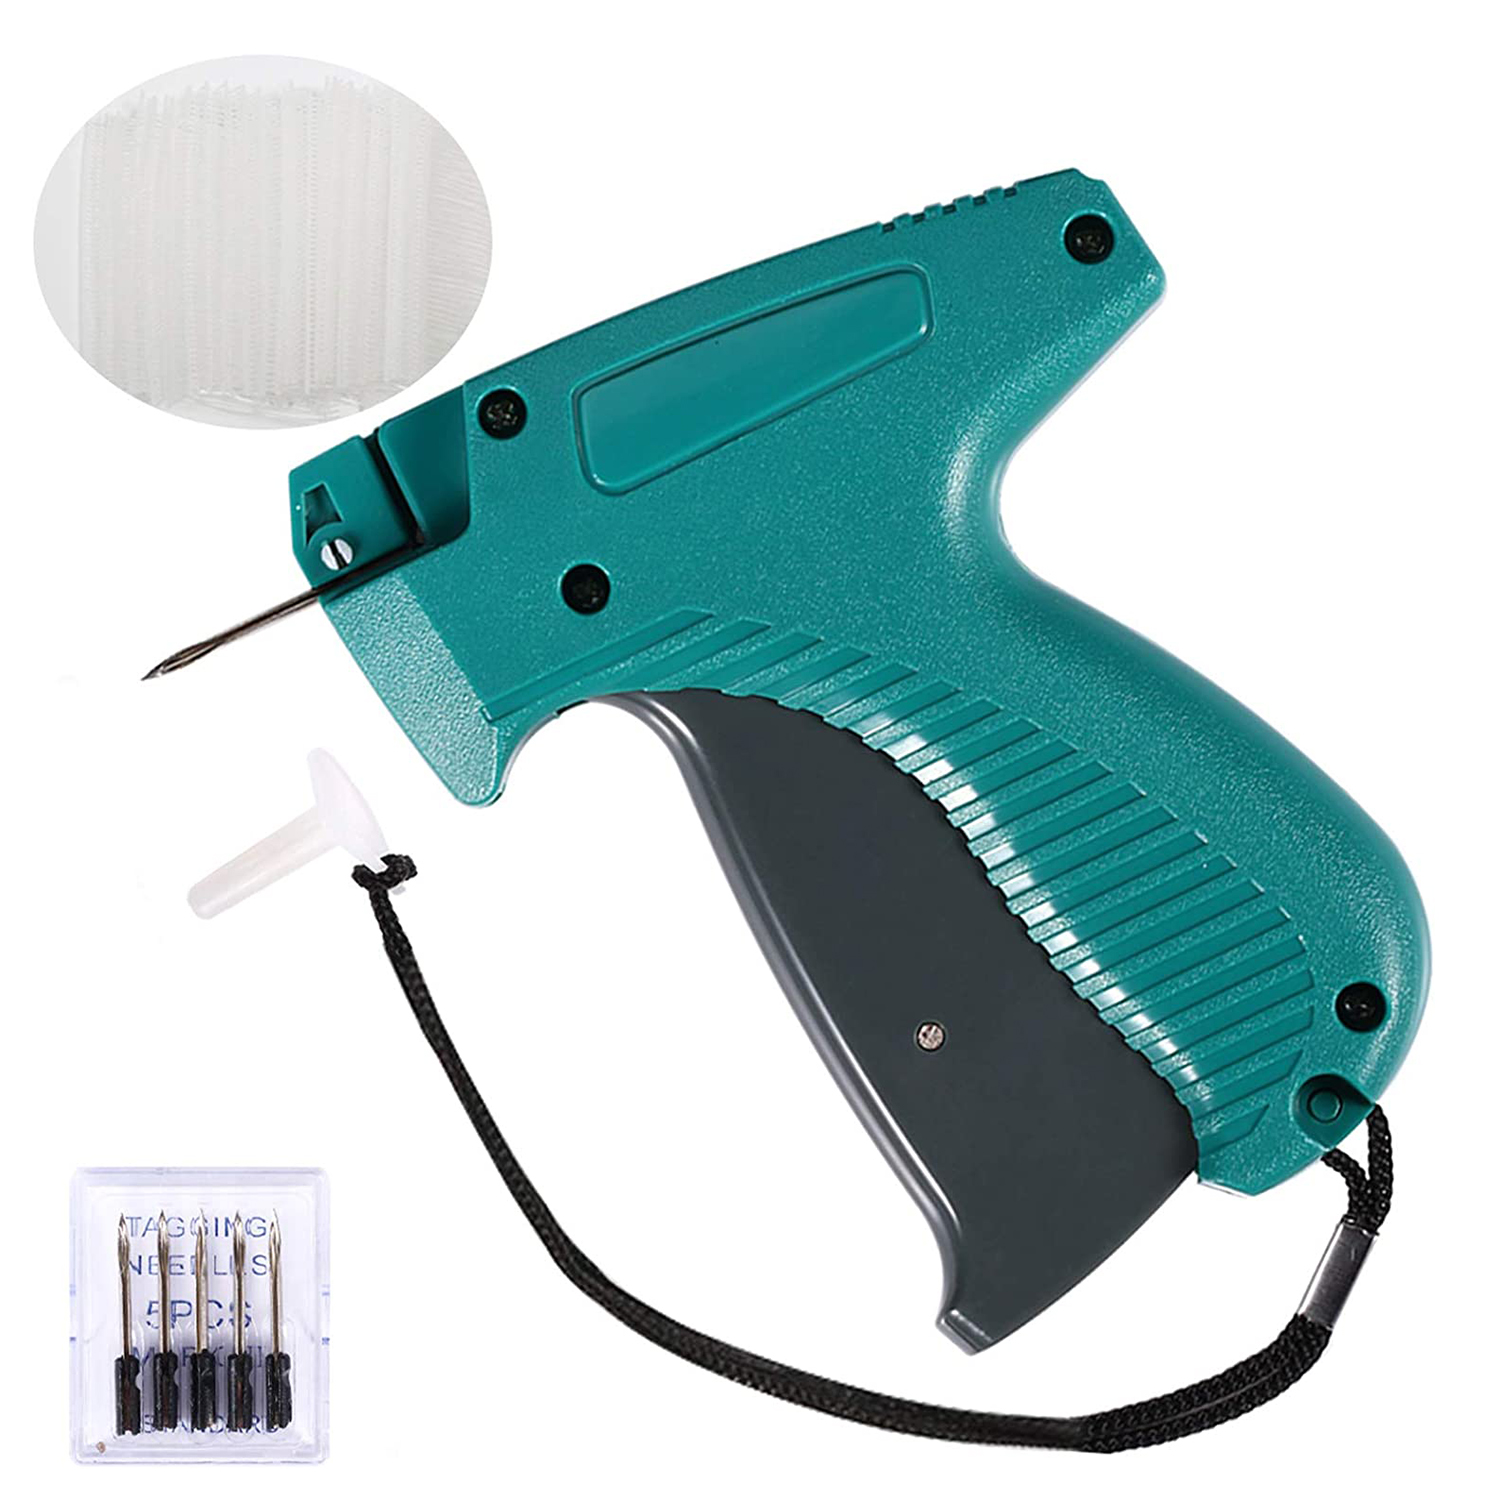 VTOSEN Micro Stitch Gun for Clothes - Clothes Tagging Tool with